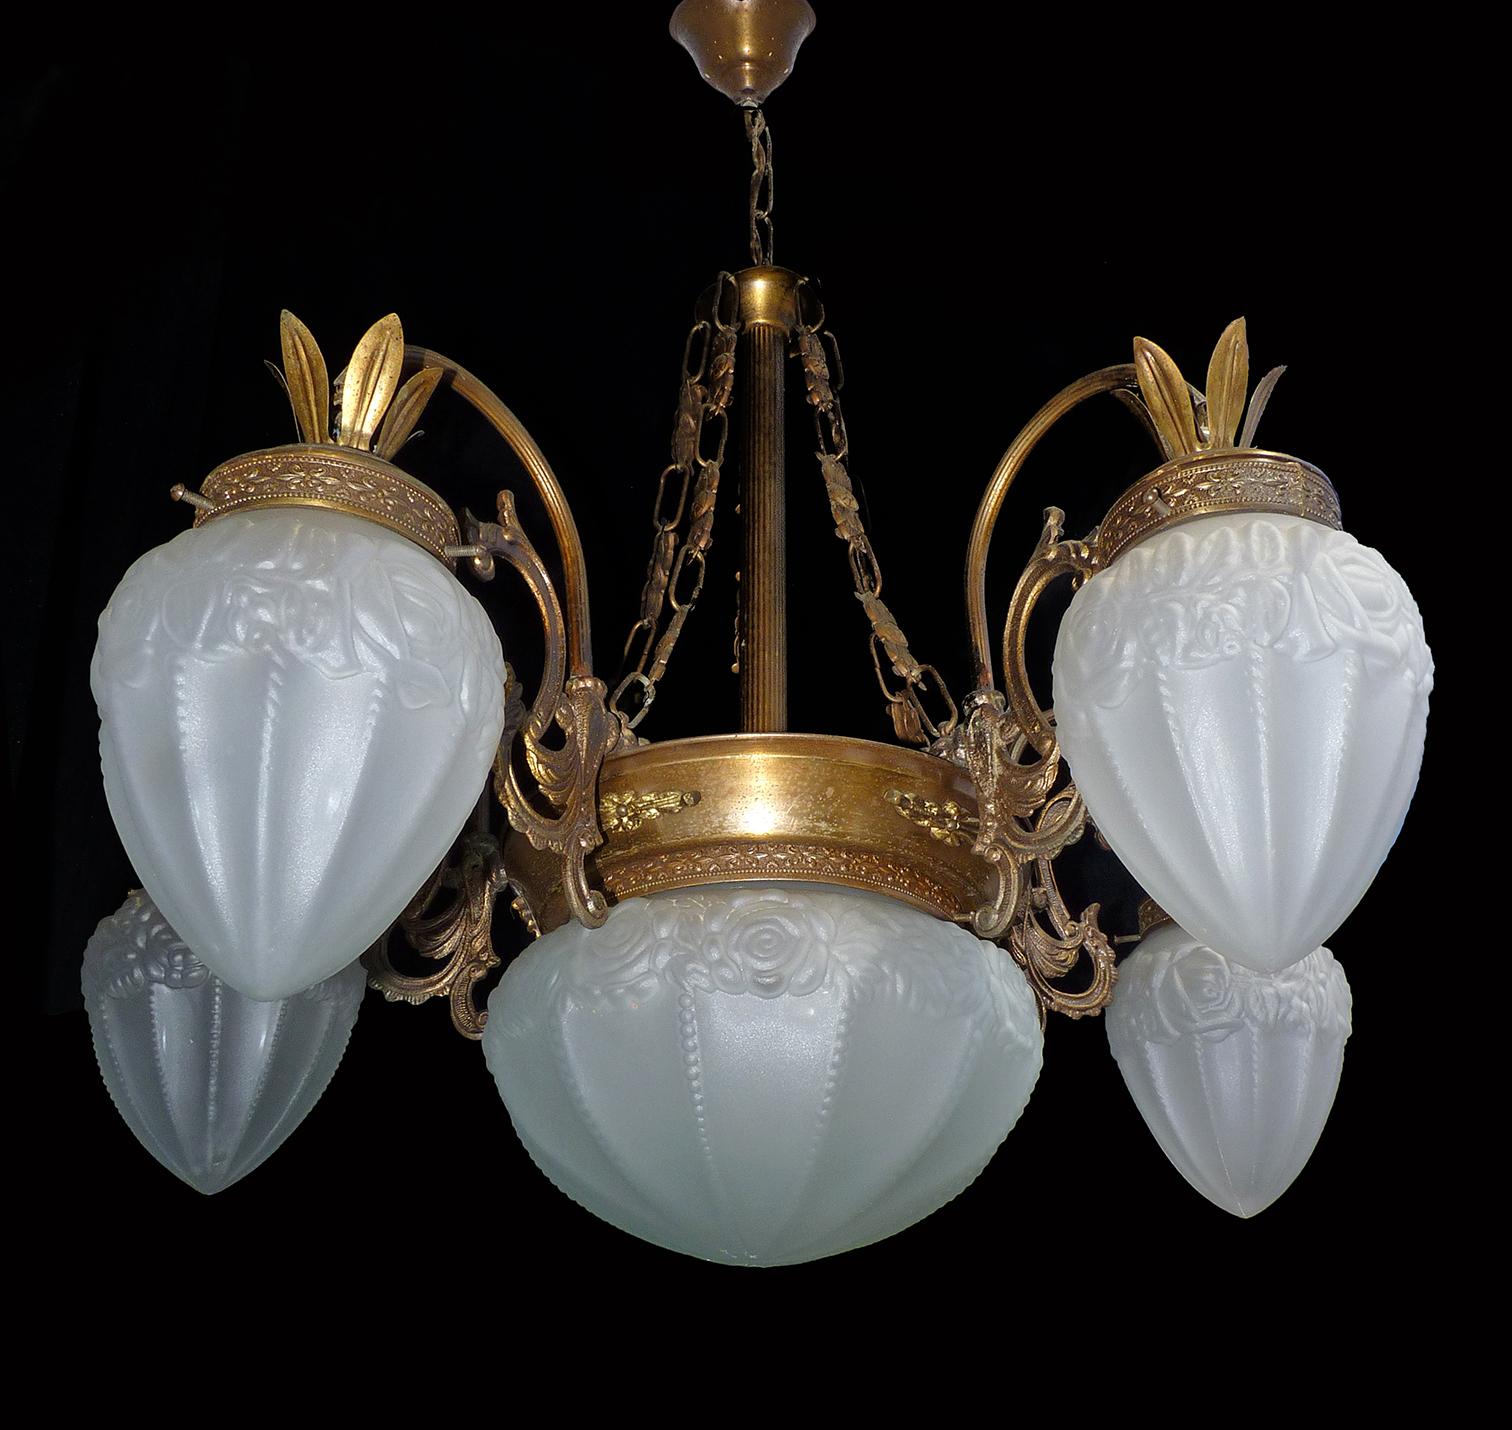 French Degué style Art Deco white frosted glass, six-light brass chandelier/ gold and bronze color metal with patina.
Six bulbs (five bulbs E14 40W and one bulb E27 60W)
Good working condition / European rewired
Measures: Diameter 28.5 in / 72